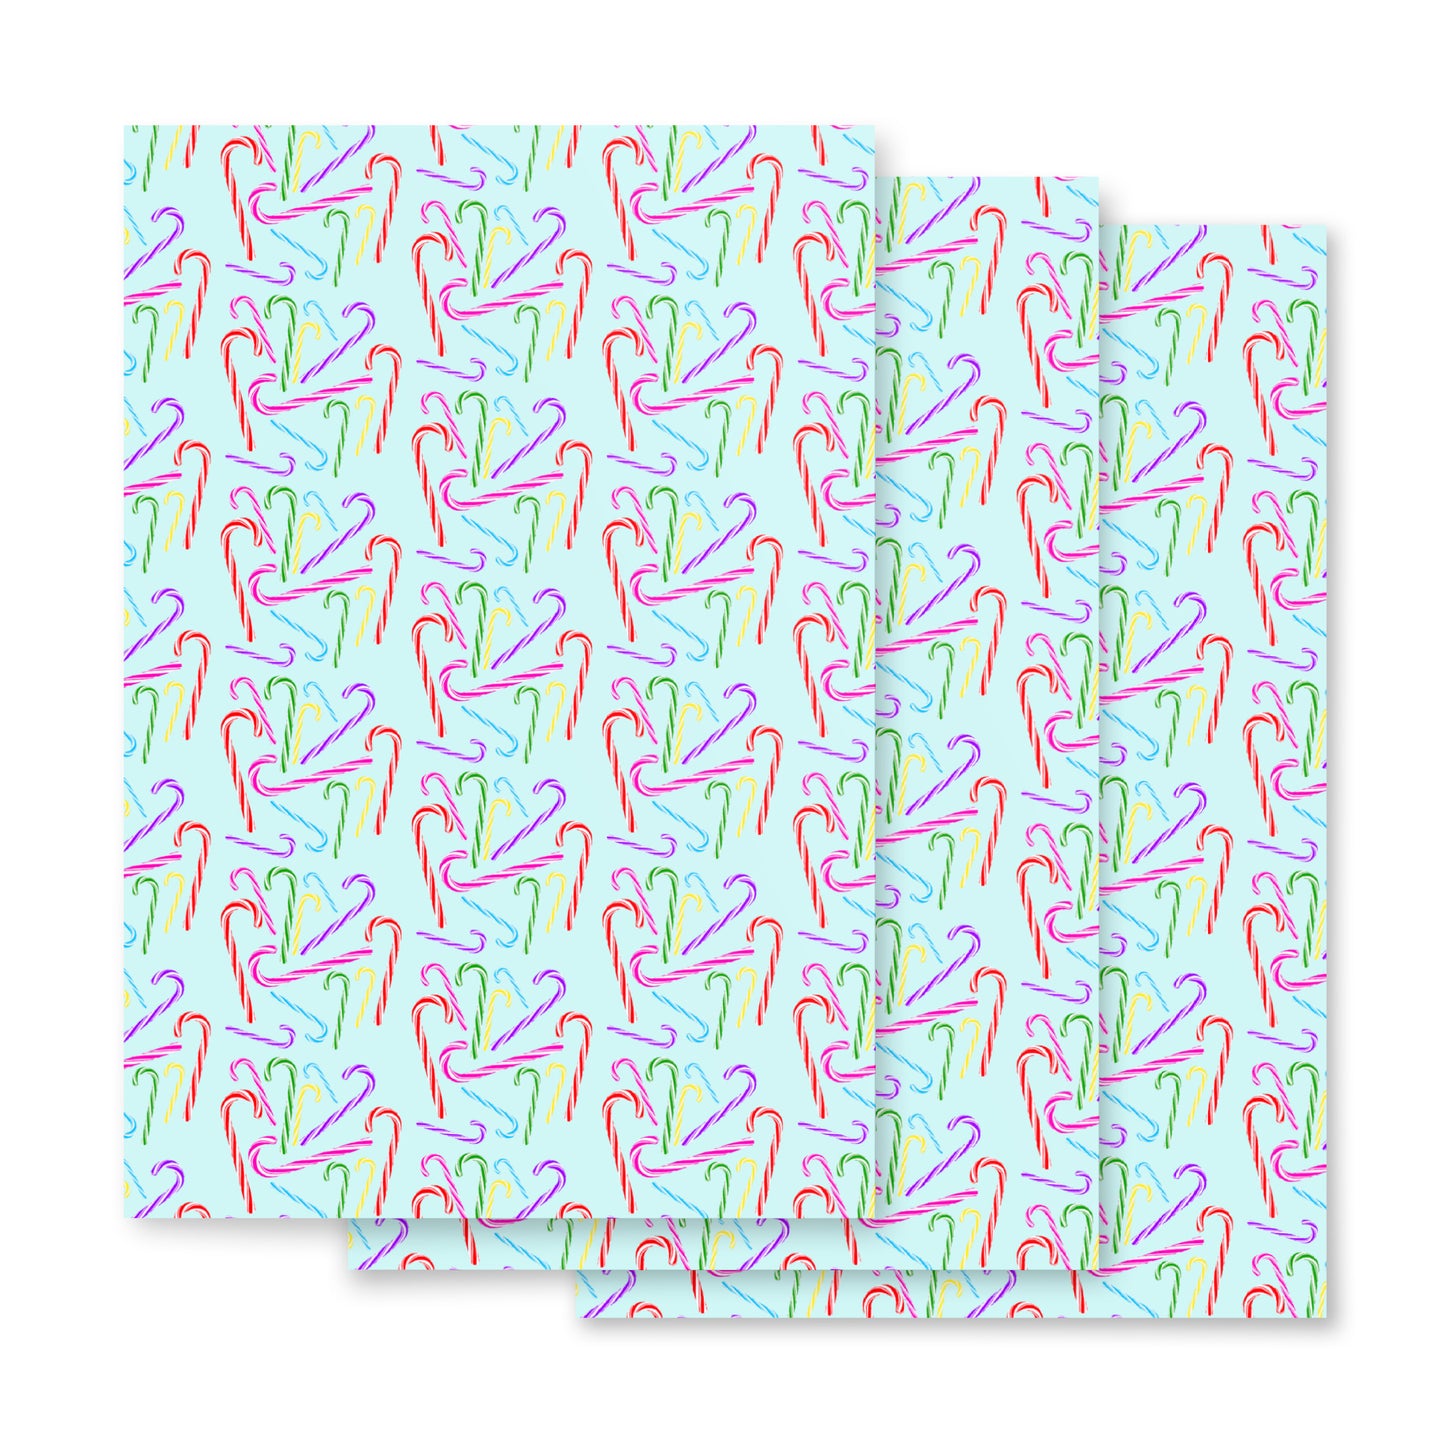 Lots of Candy Canes Wrapping paper sheets